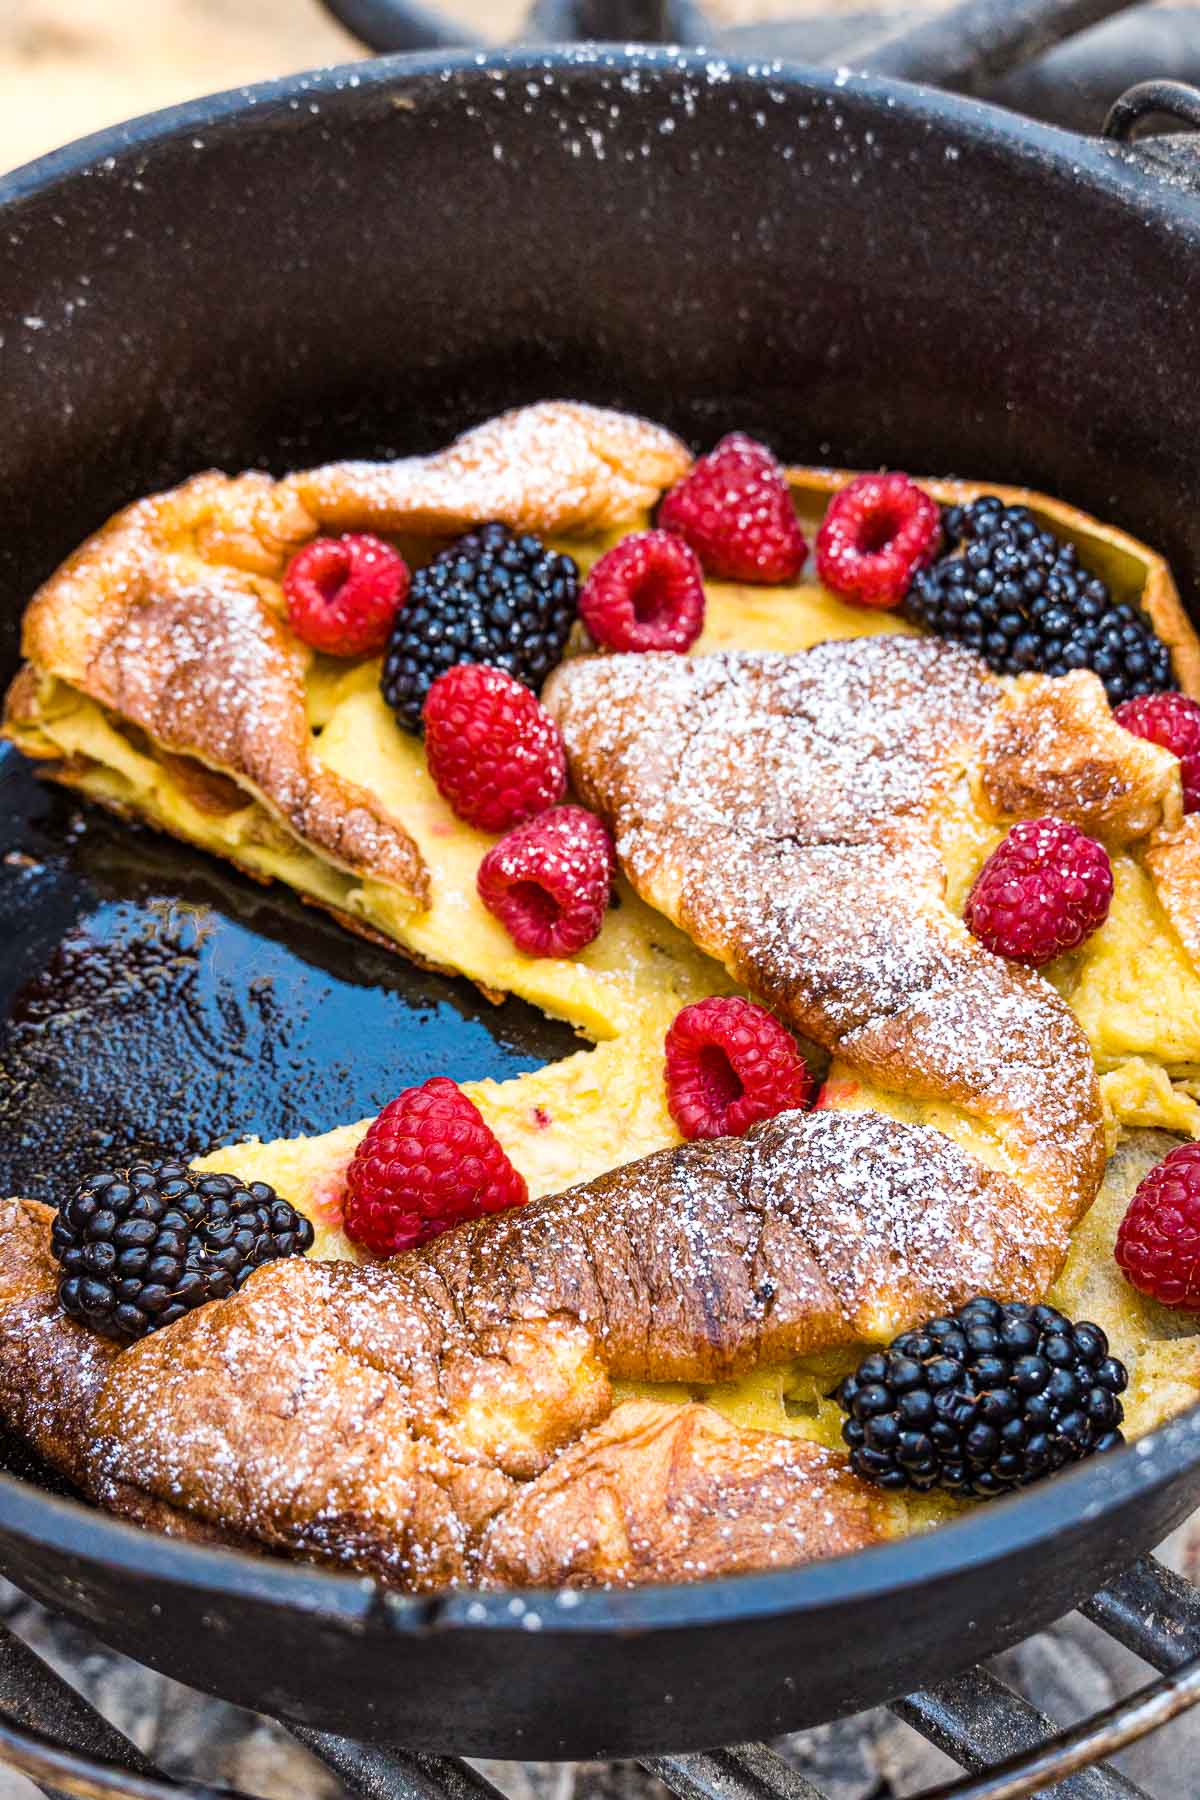 Dutch baby with a slice cut out